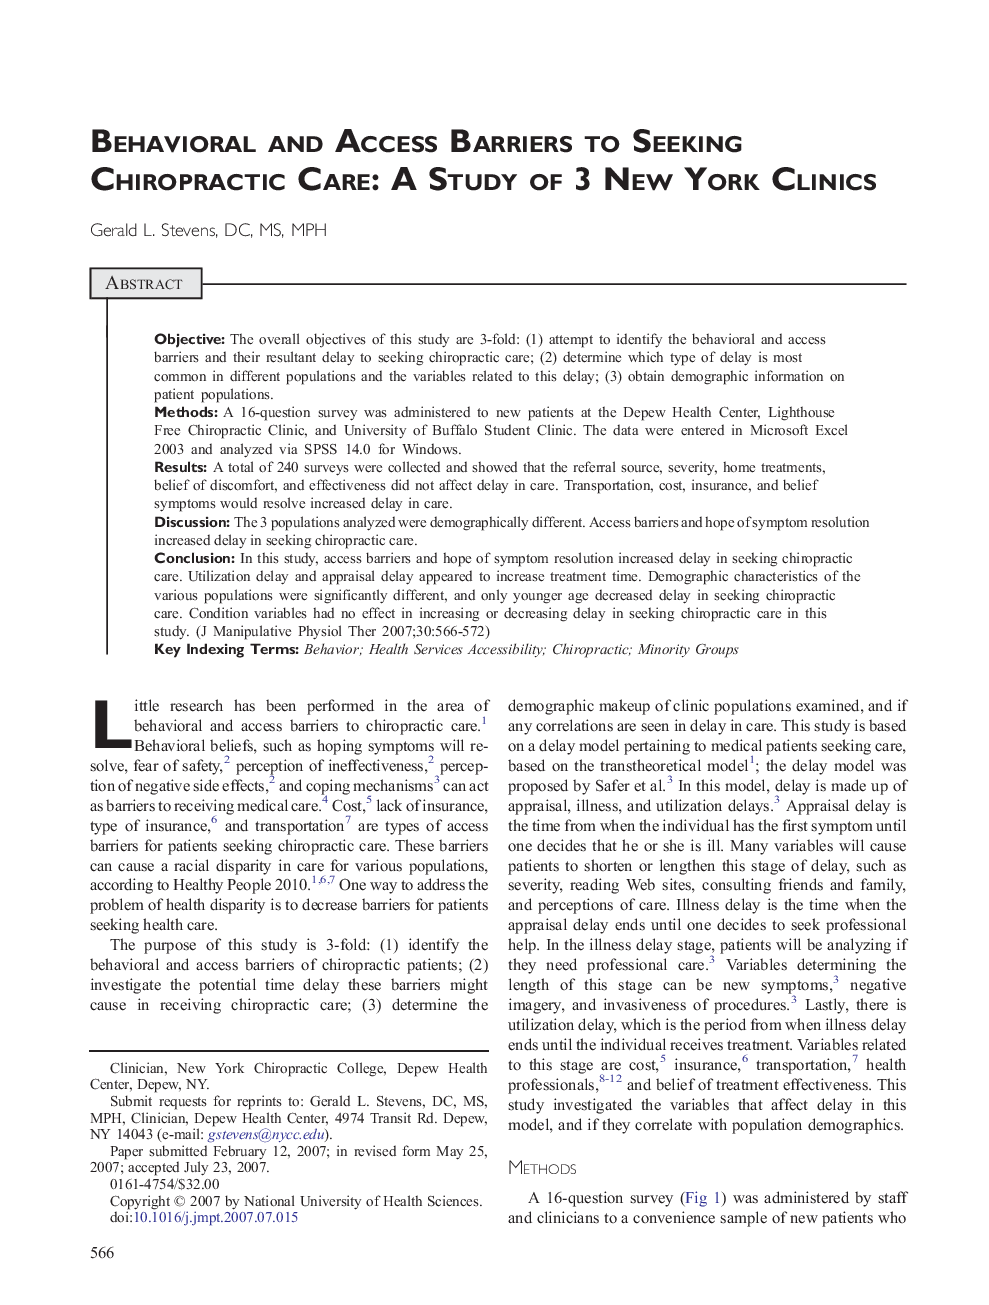 Behavioral and Access Barriers to Seeking Chiropractic Care: A Study of 3 New York Clinics